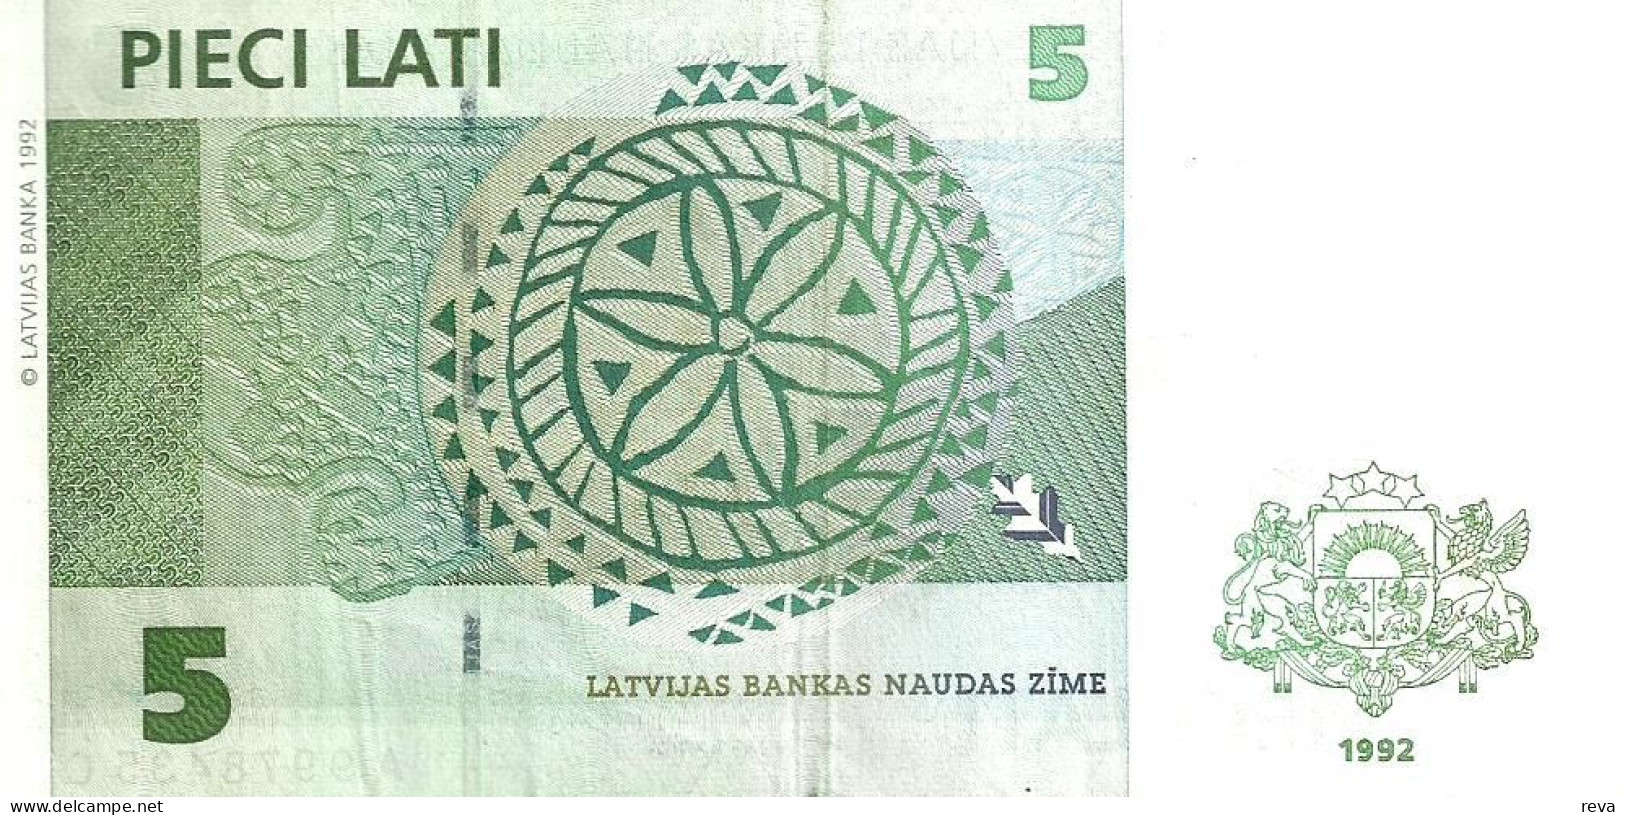 LATVIA  5 LATI GREEN TREE FRONT & ABSTRACT DESING BACK DATED 1992 VF+/VF+ P.43a READ DESCRIPTION !! - Latvia